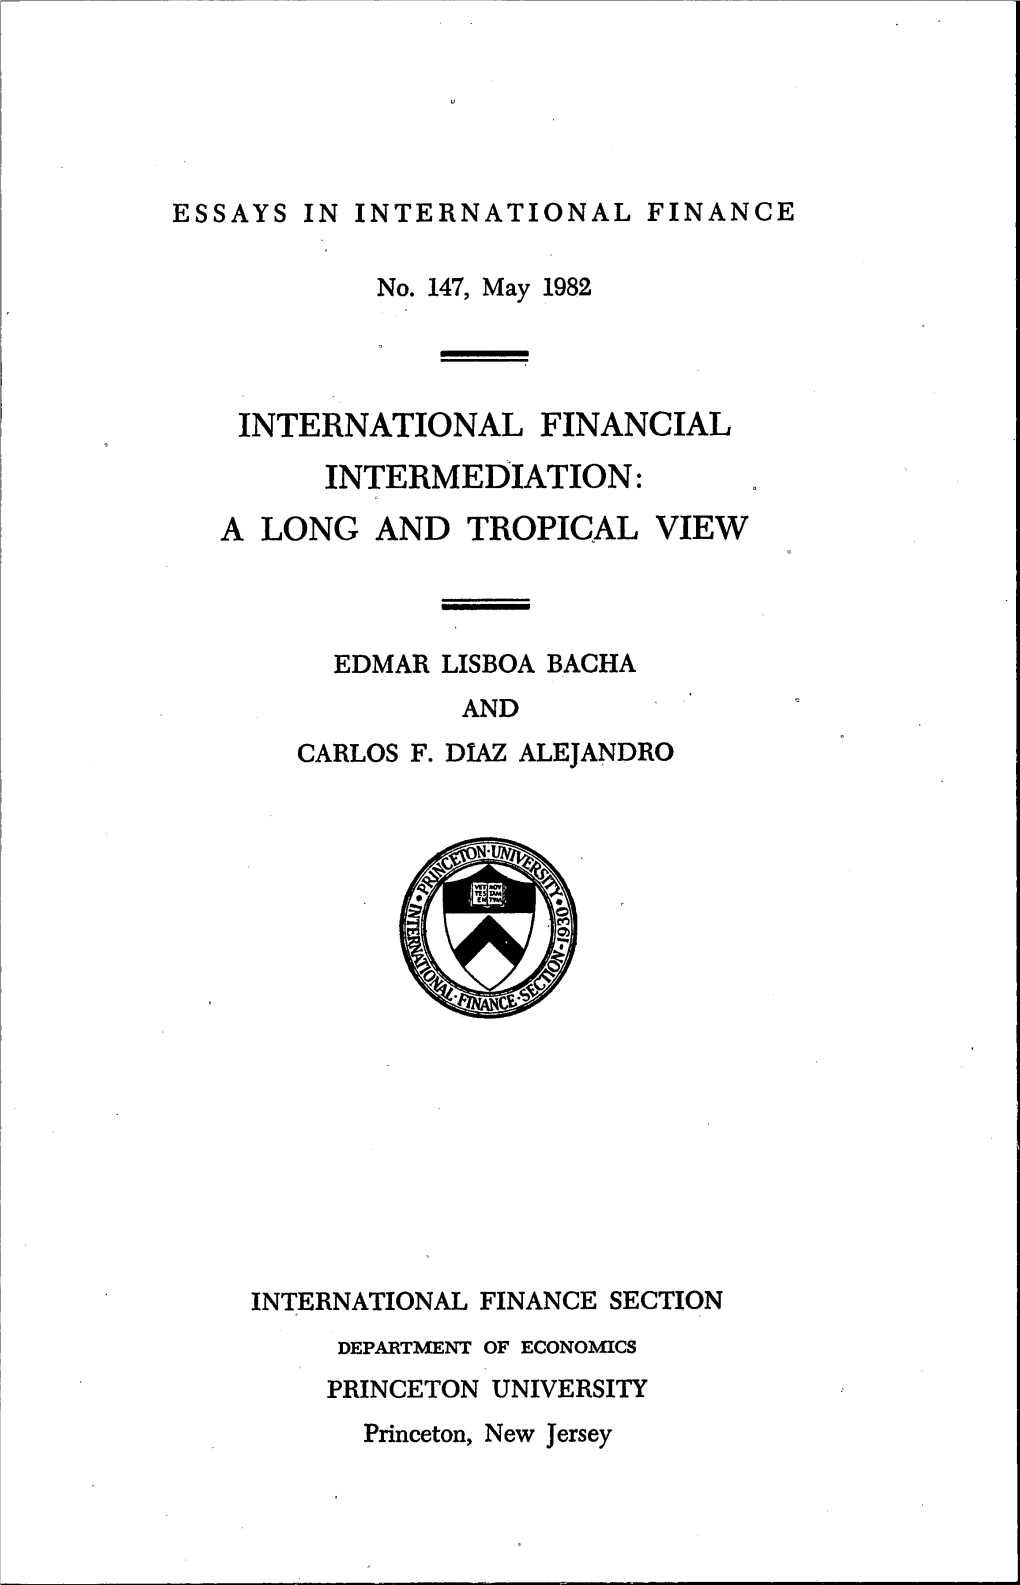 International Financial Intermediation: a Long and Tropical View